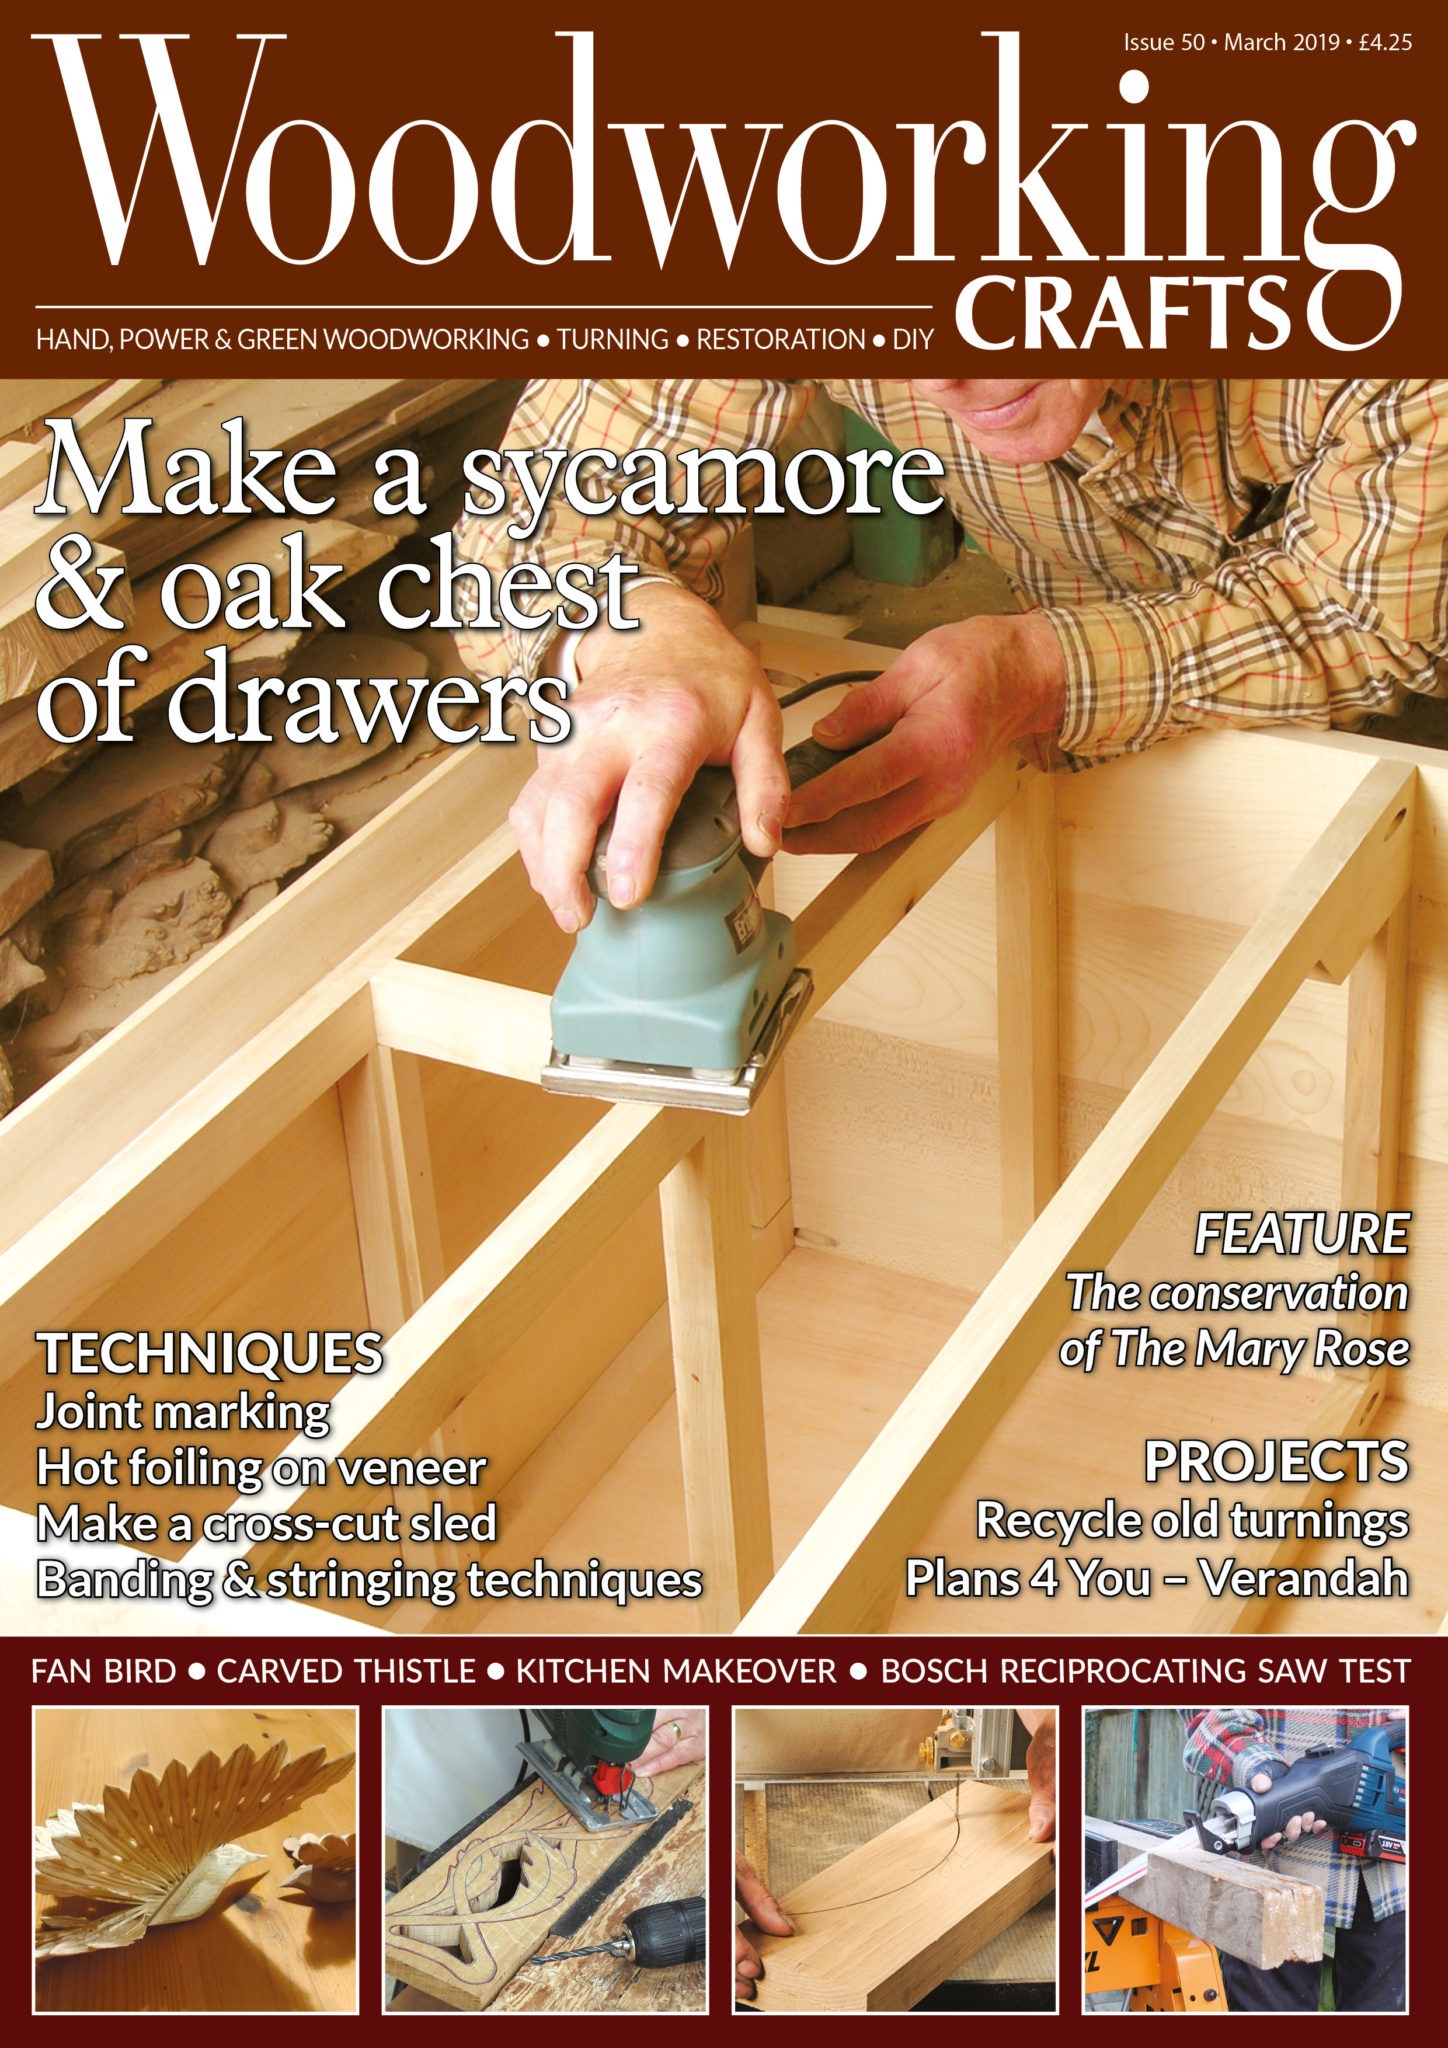 Woodworking Crafts magazine - Subscribe - GMC Publications